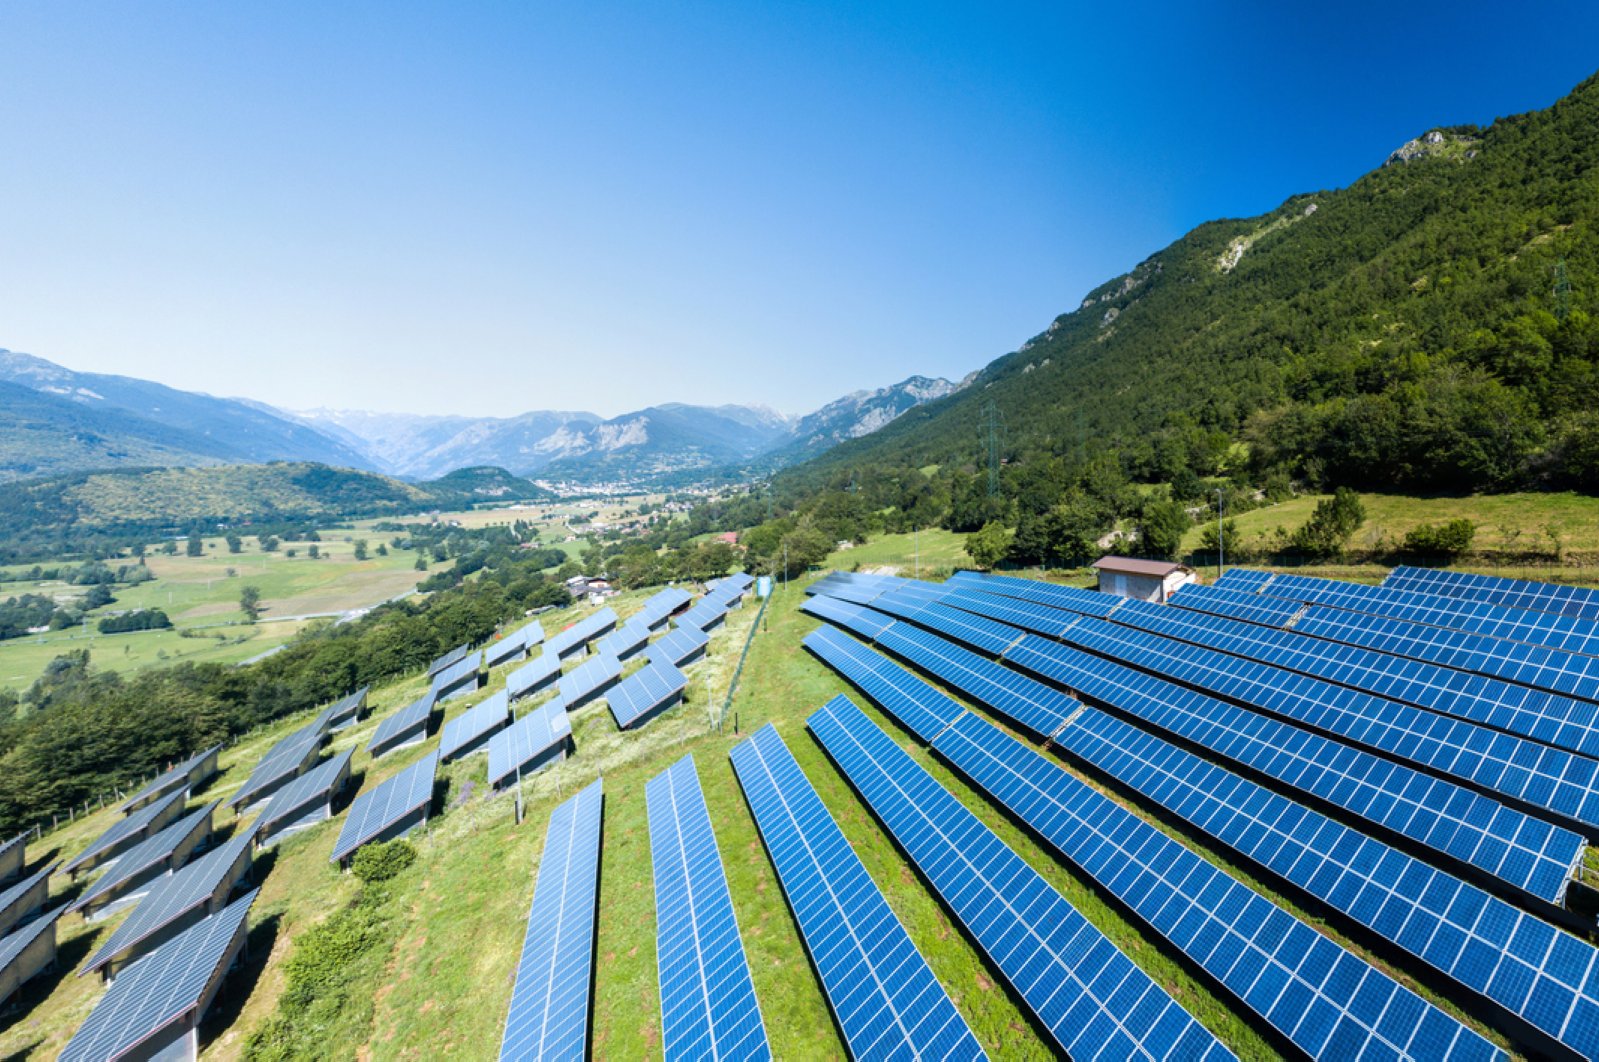 Aerial view of a solar power station in Italy installed in the Alpine mountains. (iStock Photo)